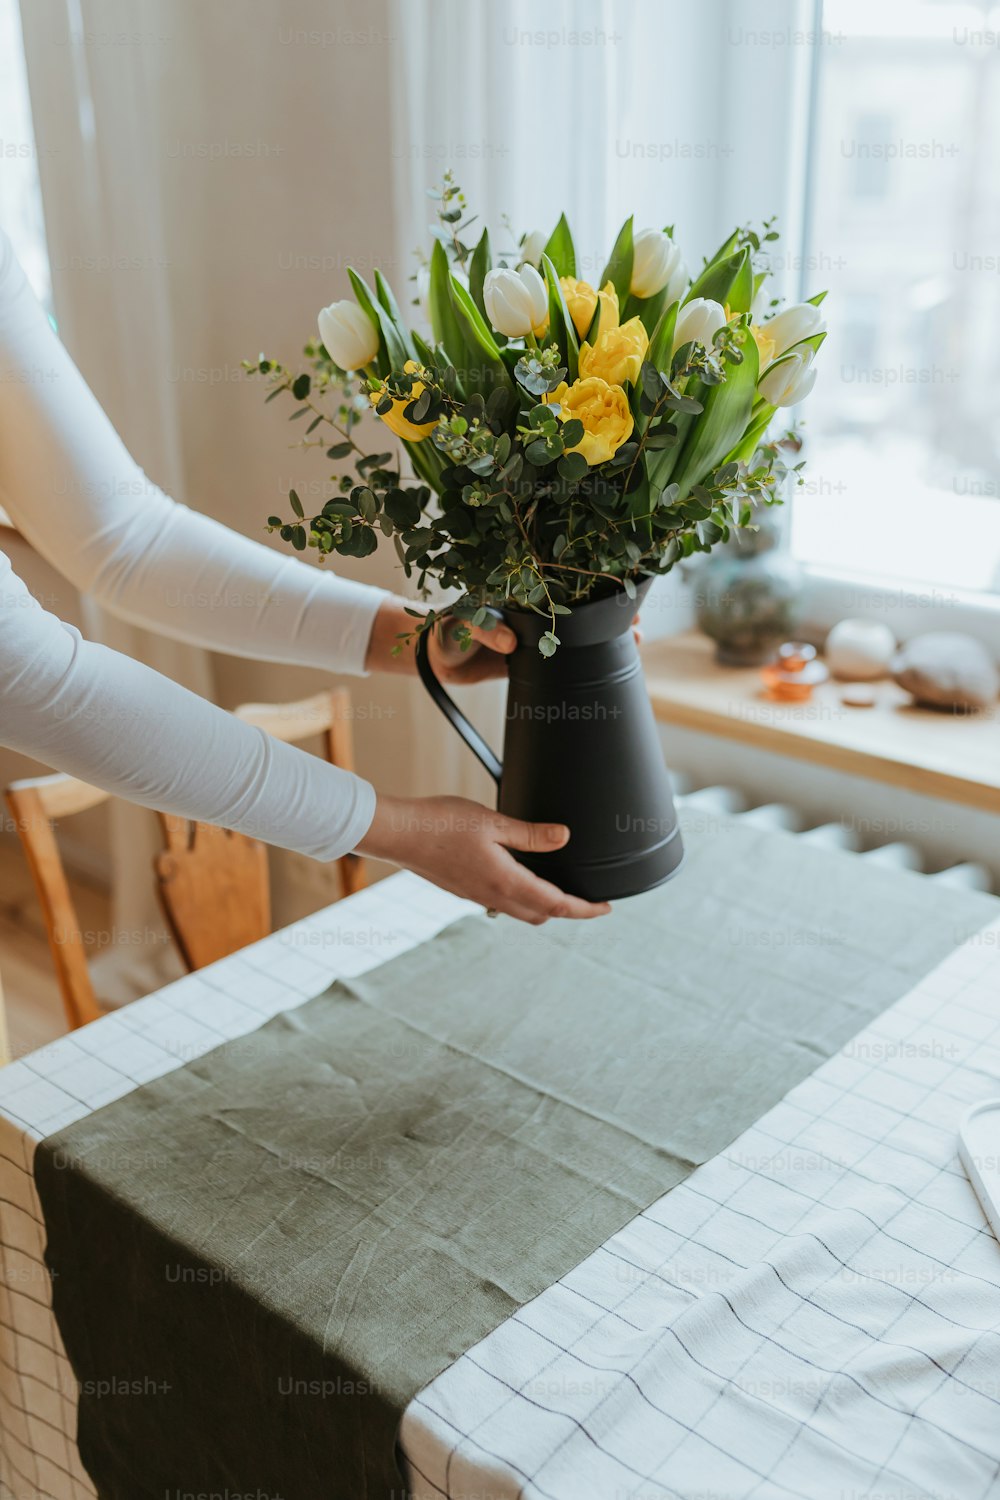 a person holding a vase with flowers on a table